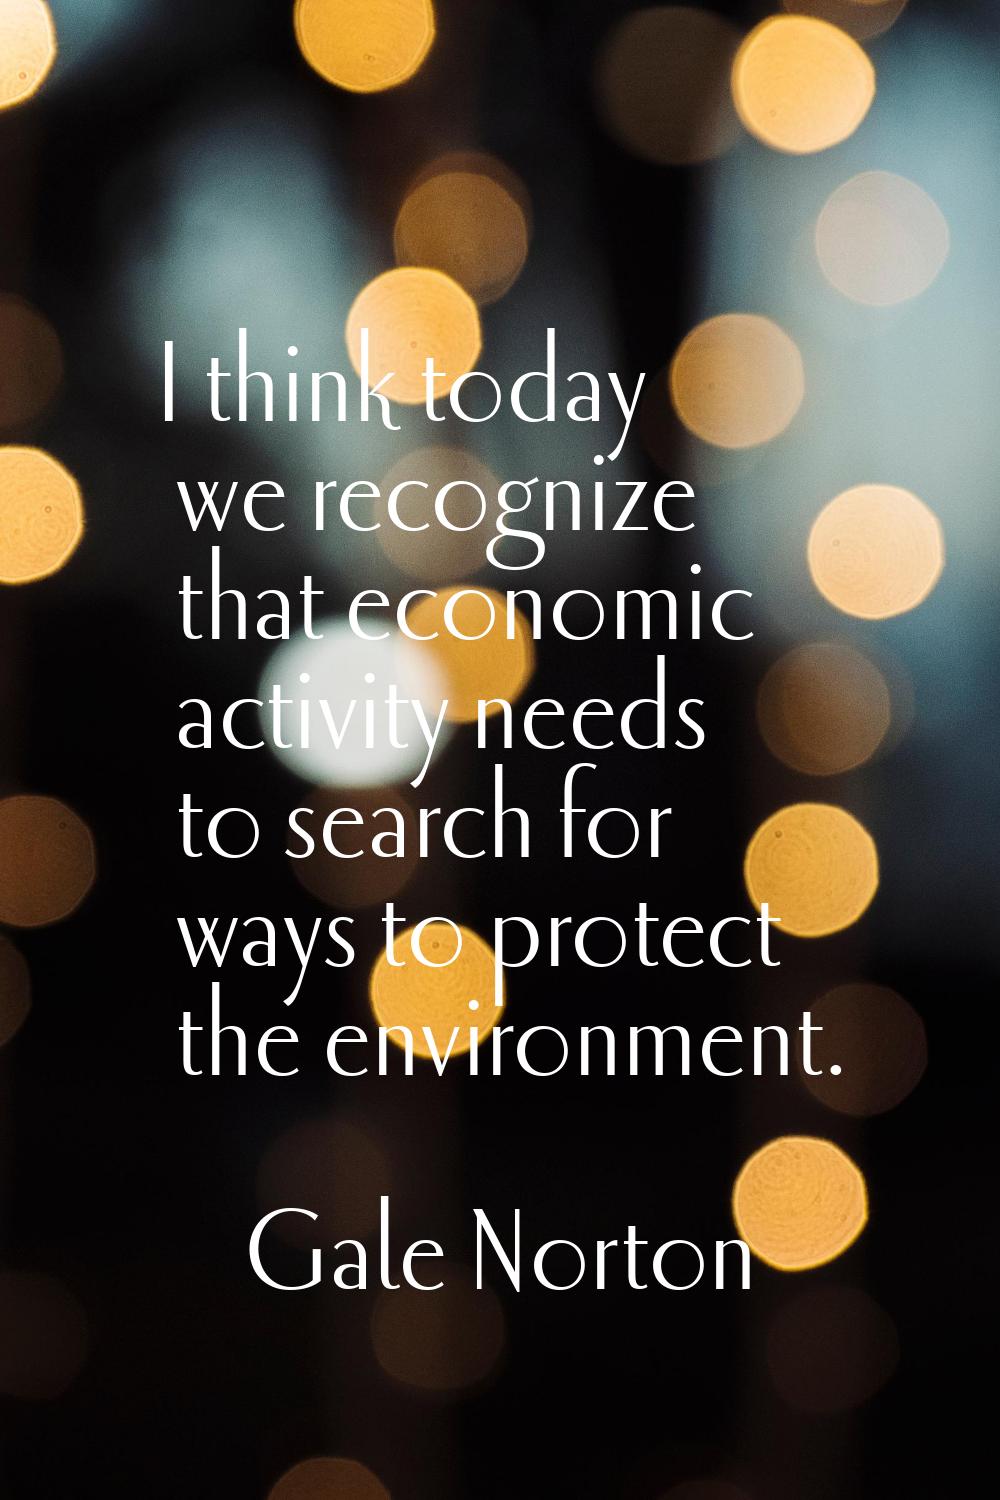 I think today we recognize that economic activity needs to search for ways to protect the environme